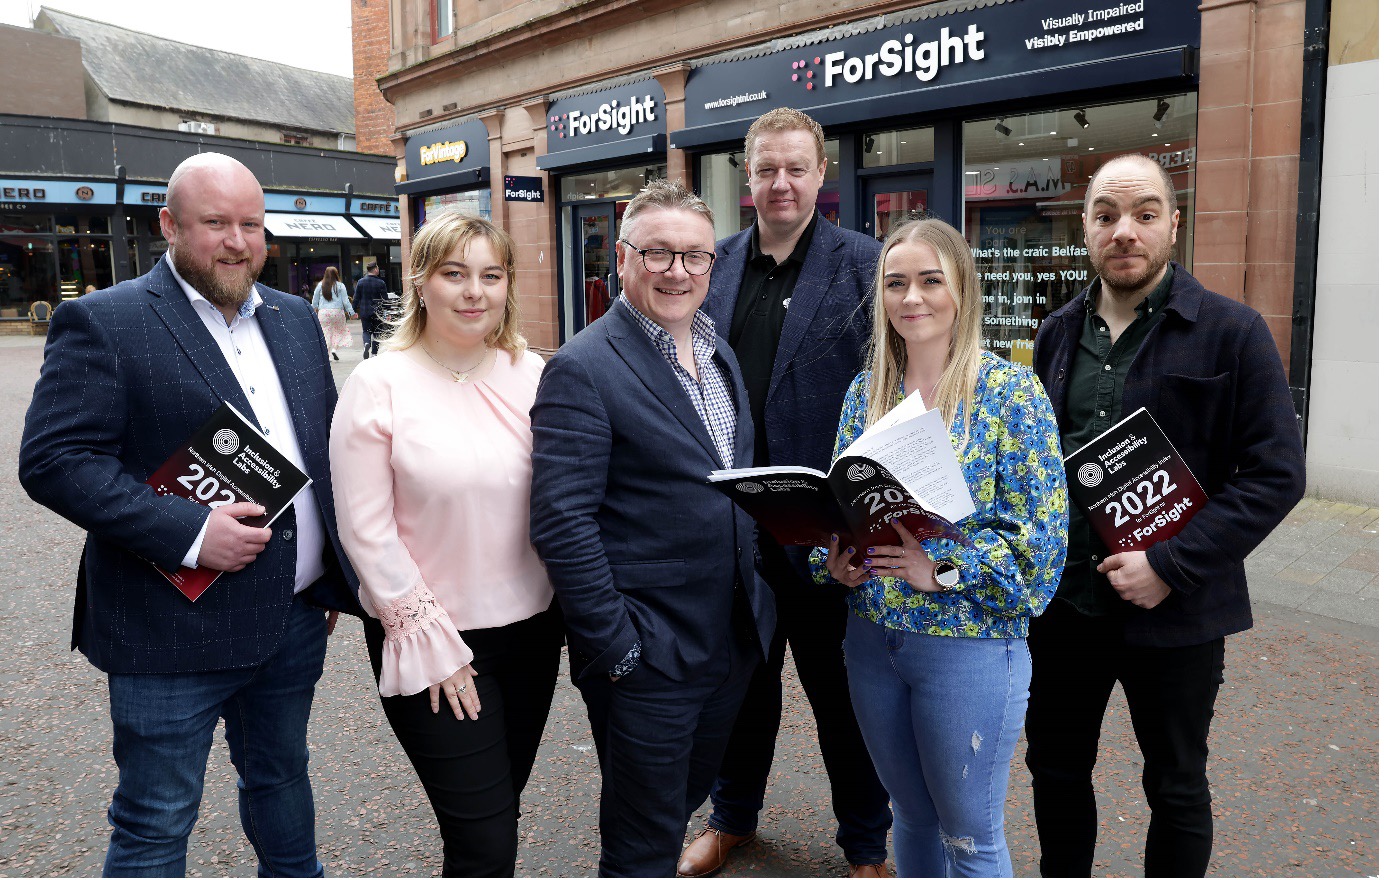 Sean Doran, Adela Buliman, Chris White, Kyran O'Mahoney, Amanda McClure, and Robbie Best holding the NI DAI Report in front of a ForSight shop.